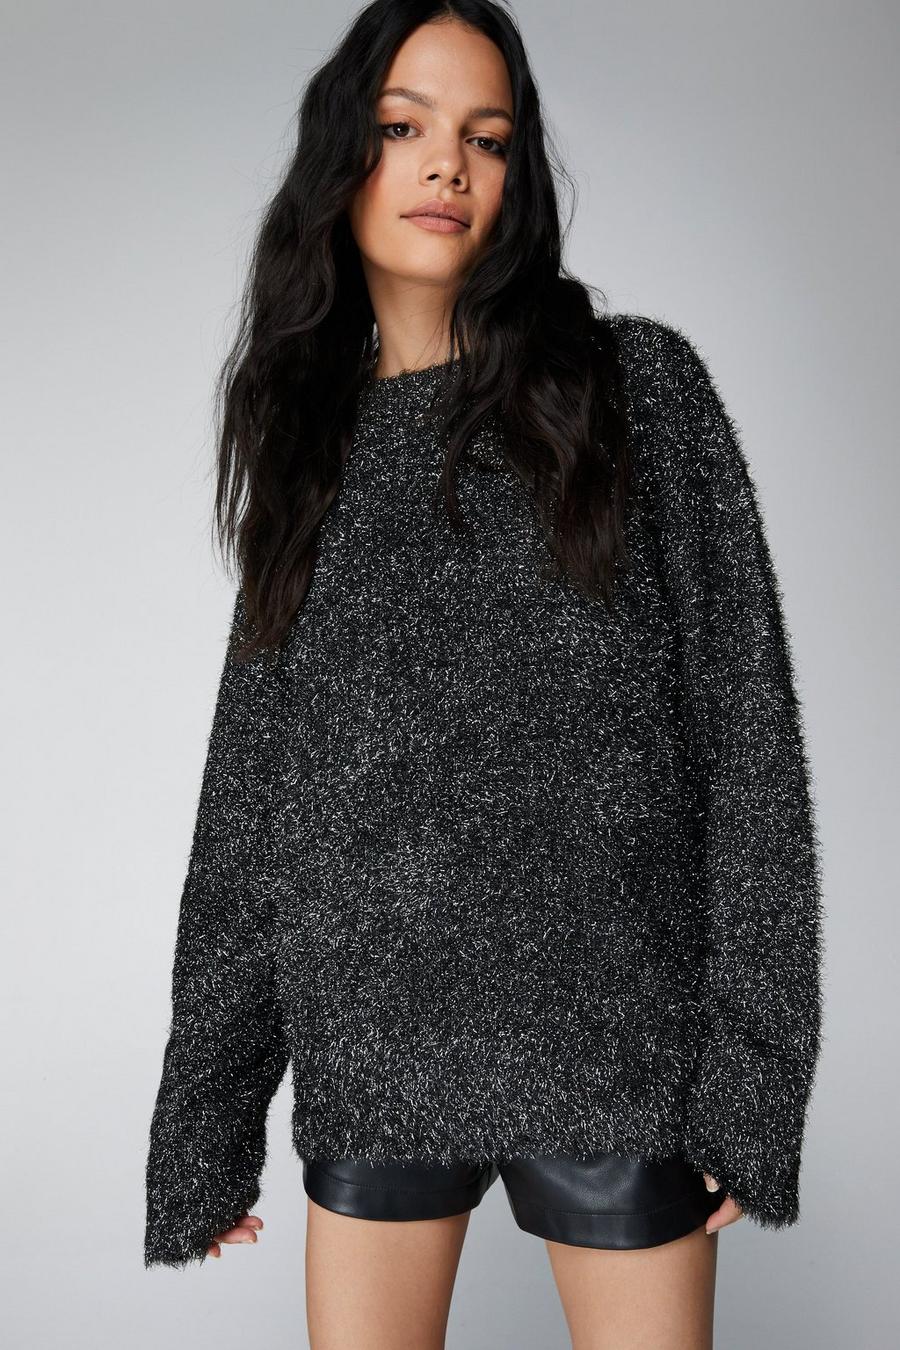 Silver Tinsel Oversized Sweater